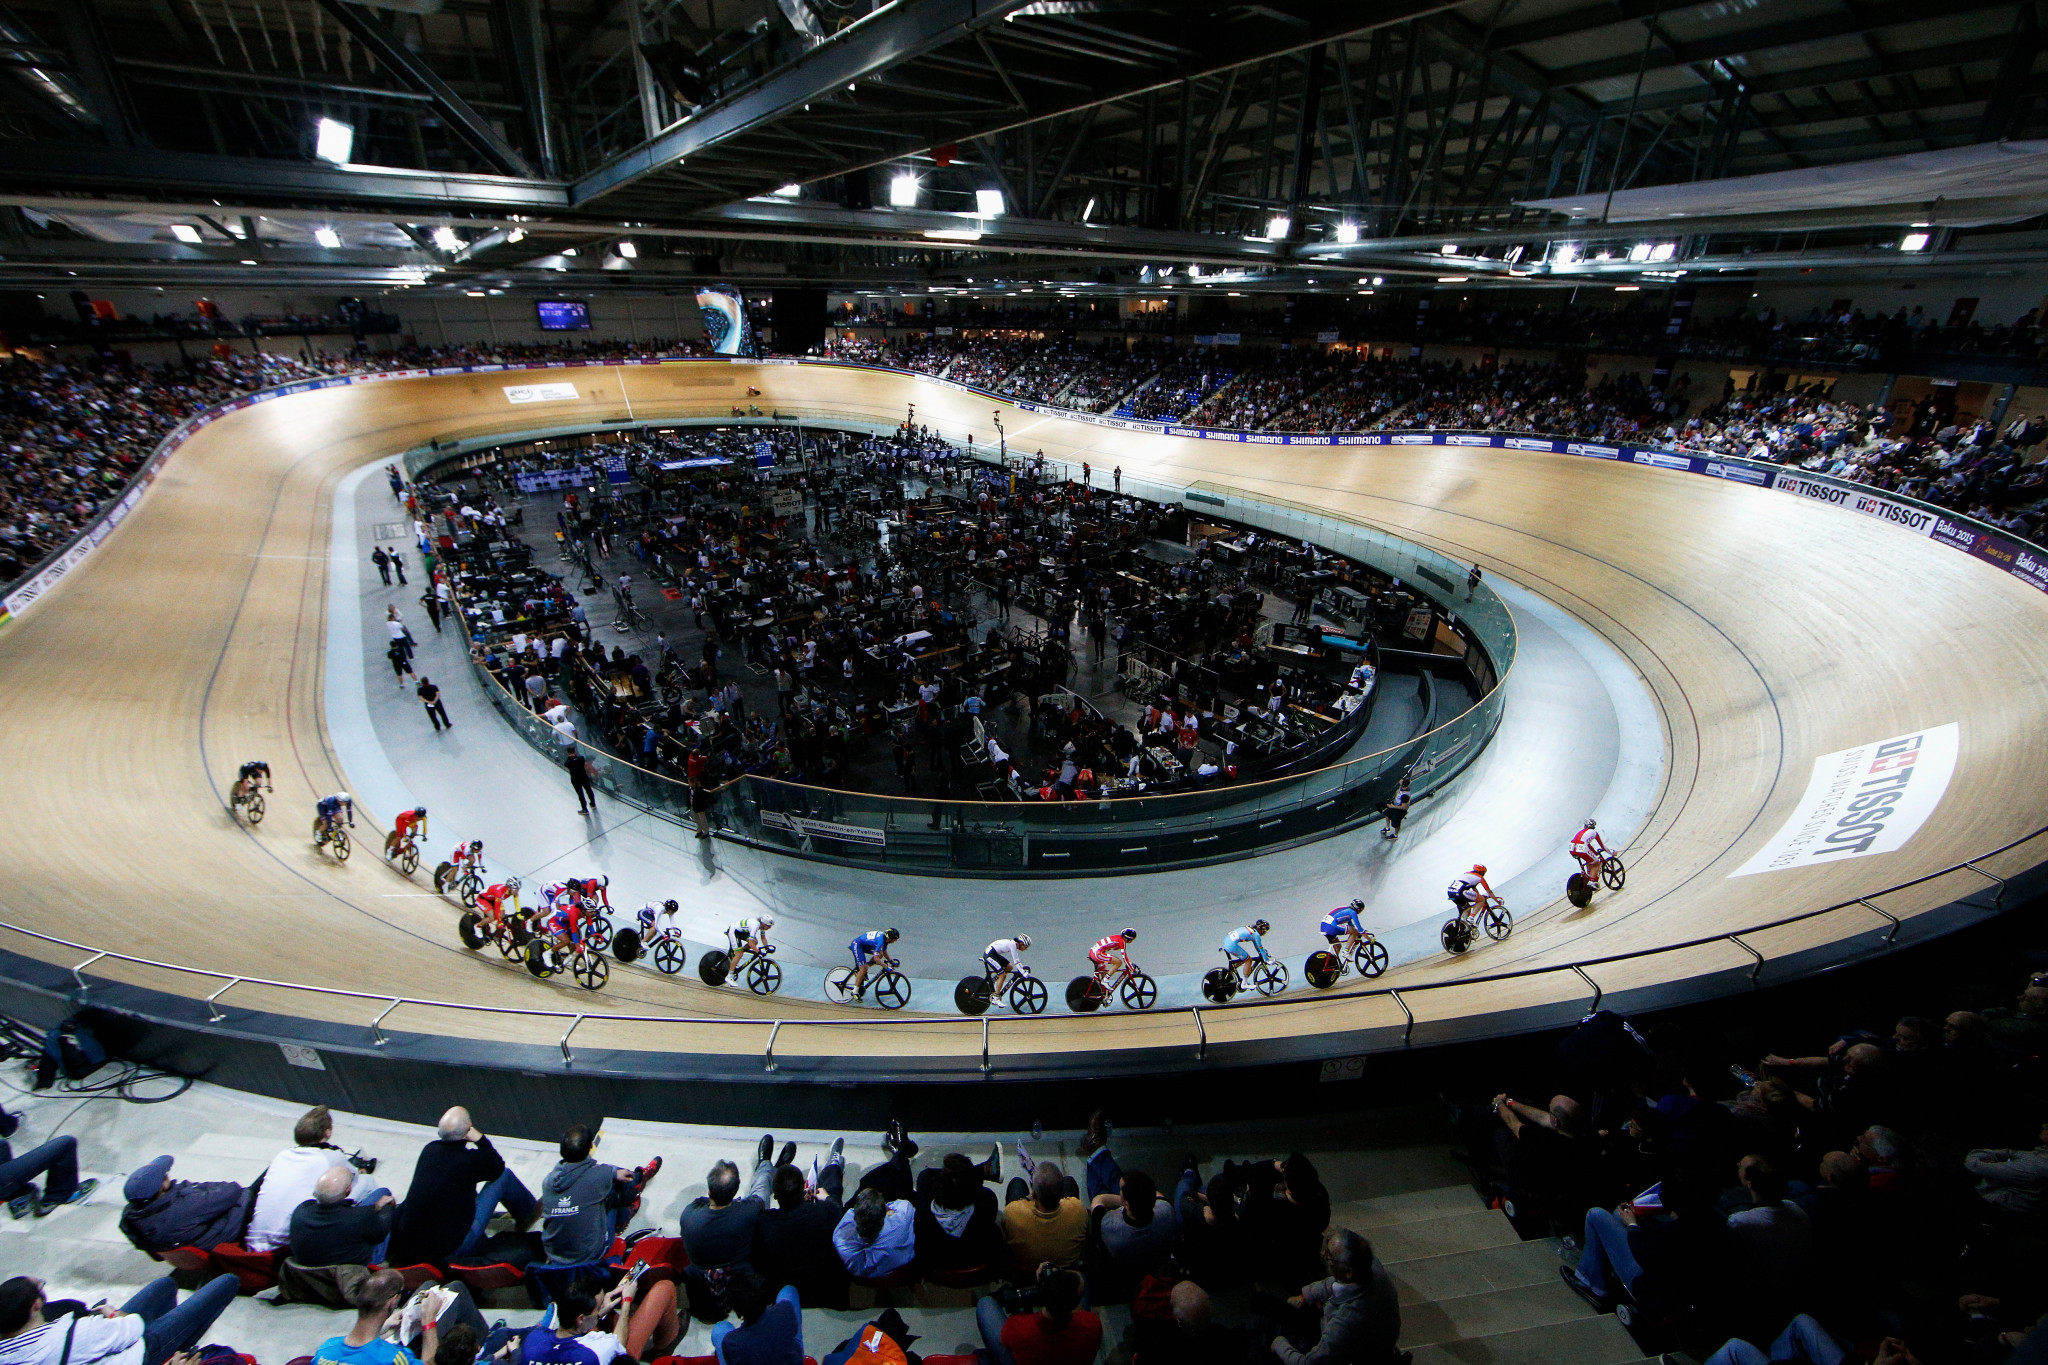 The Saint-Quentin-en-Yvelines National Velodrome is set to host the UCI Para-Cycling Track World Championships from October 20 to 23 this year ©Getty Images